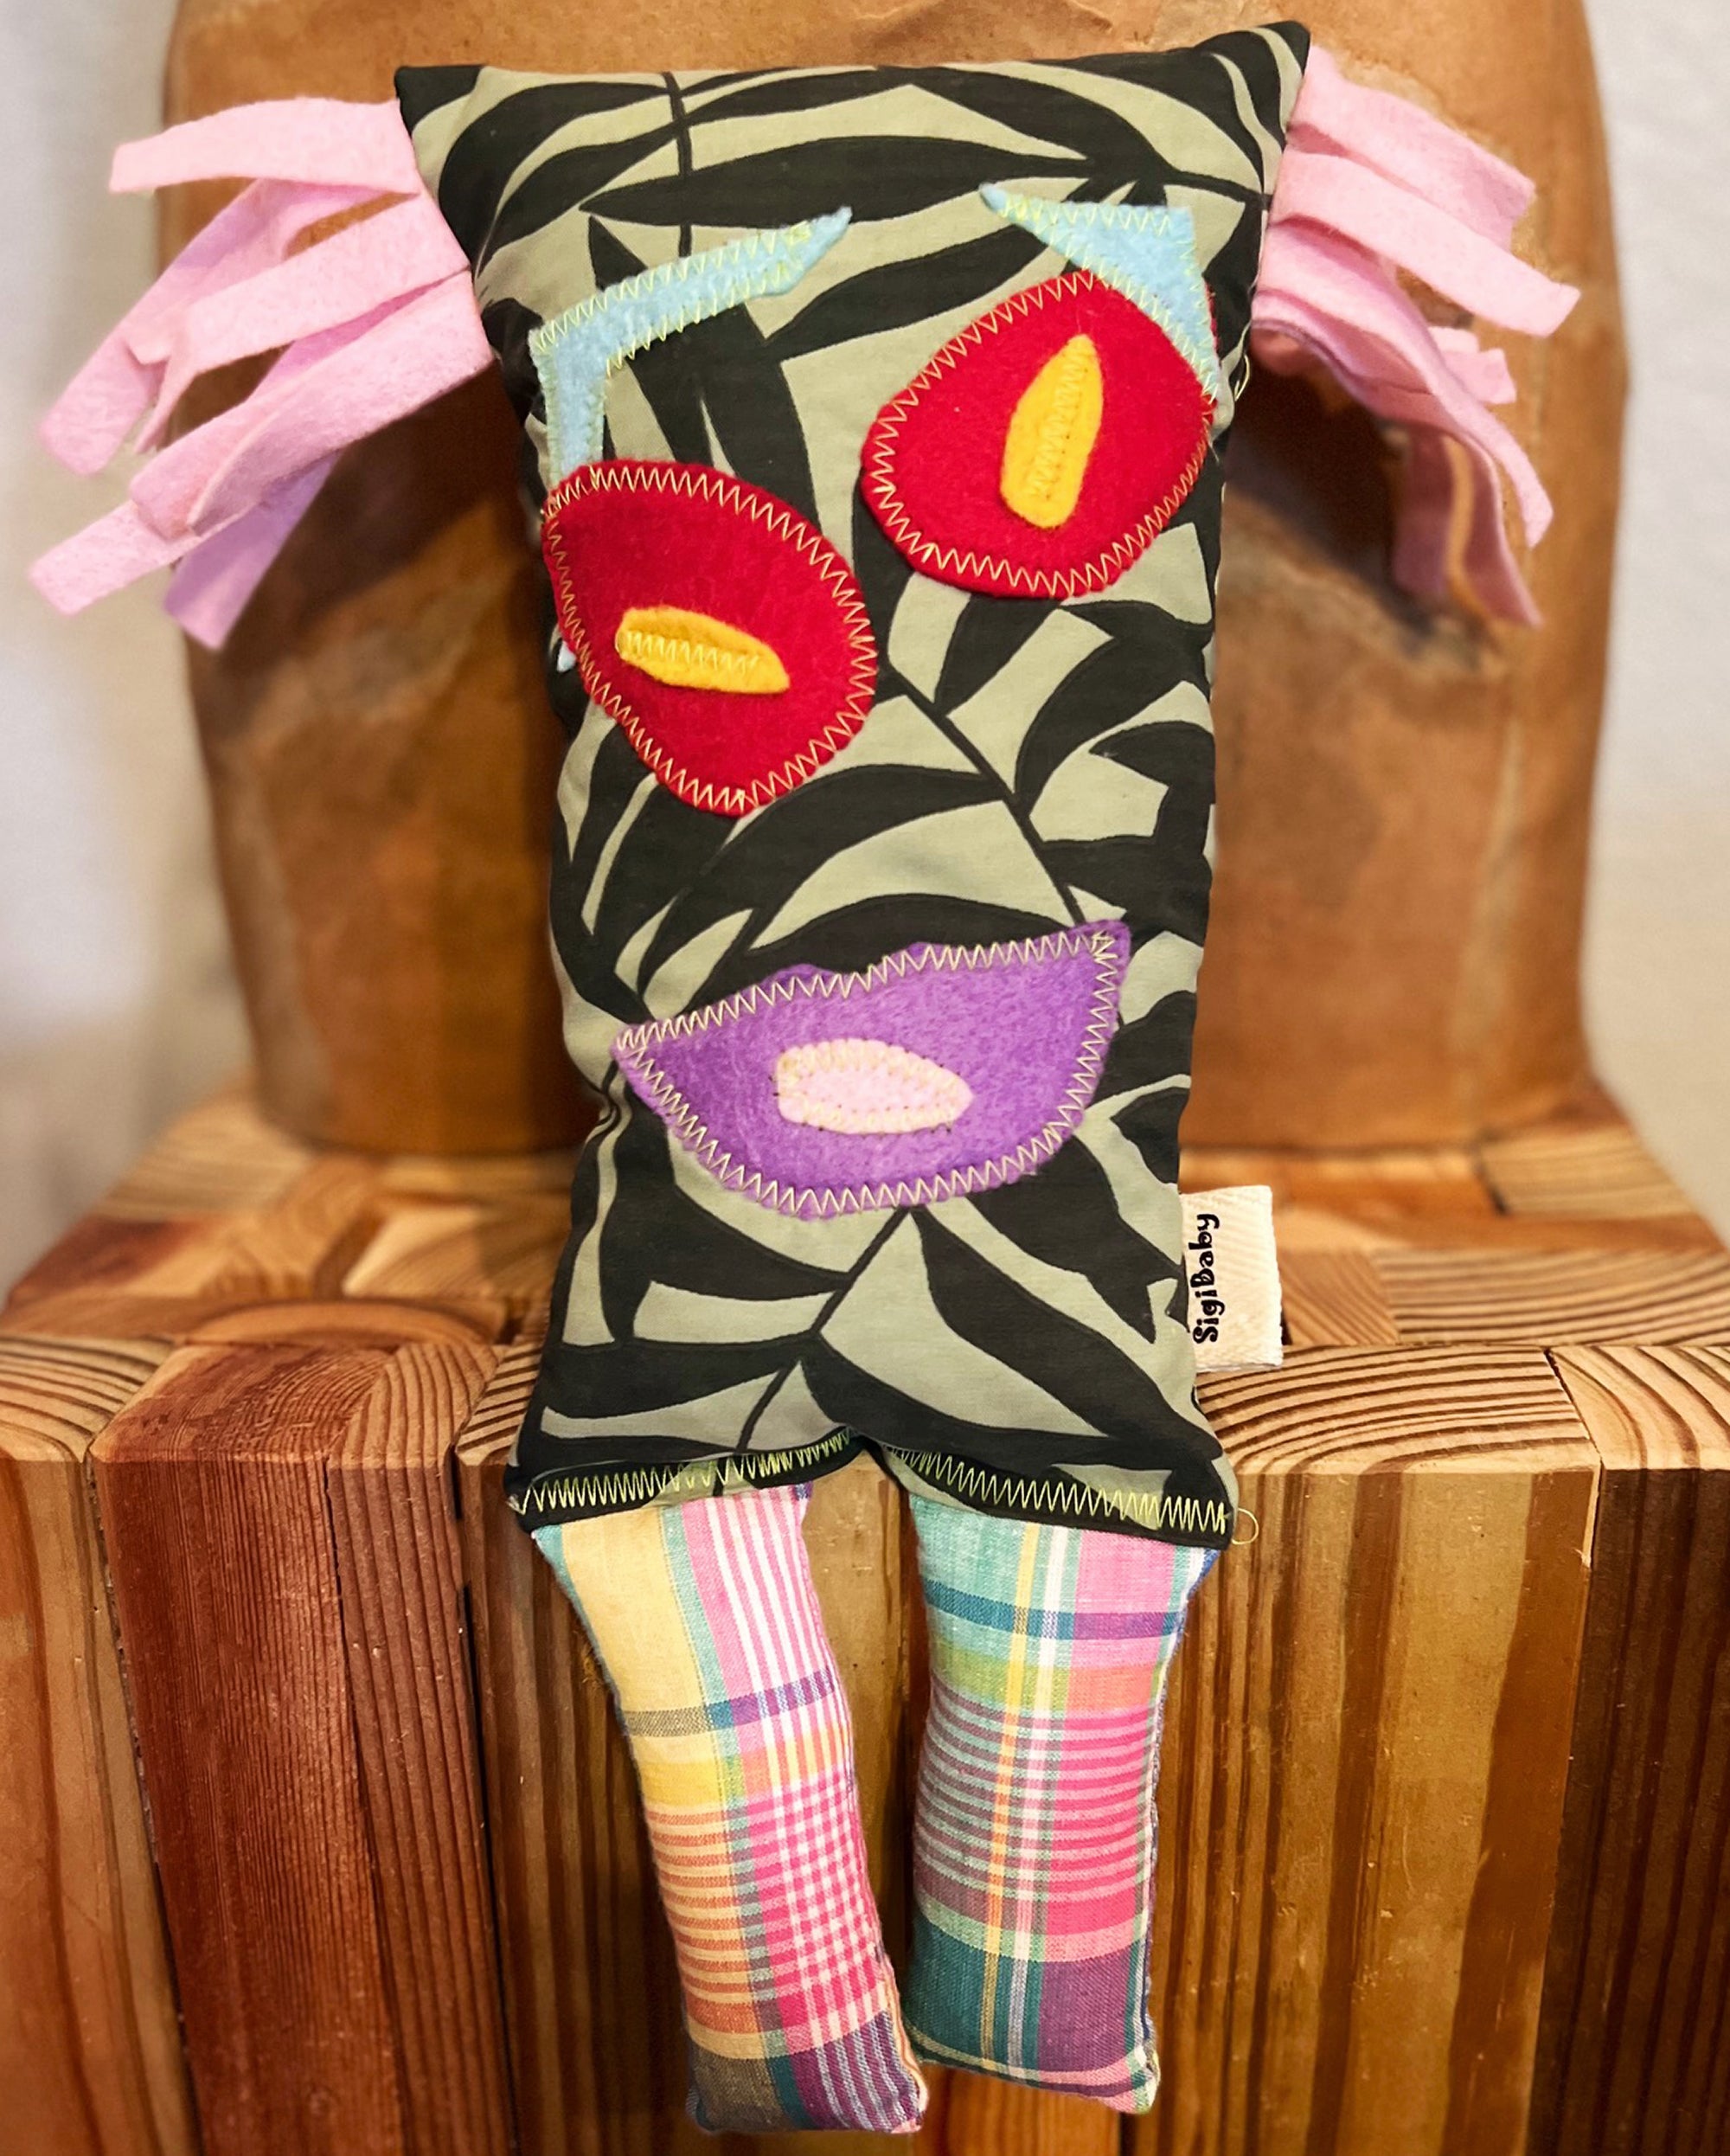 Little Monster "Gertie" Handmade Recycled Fabric Plush Toy Doll